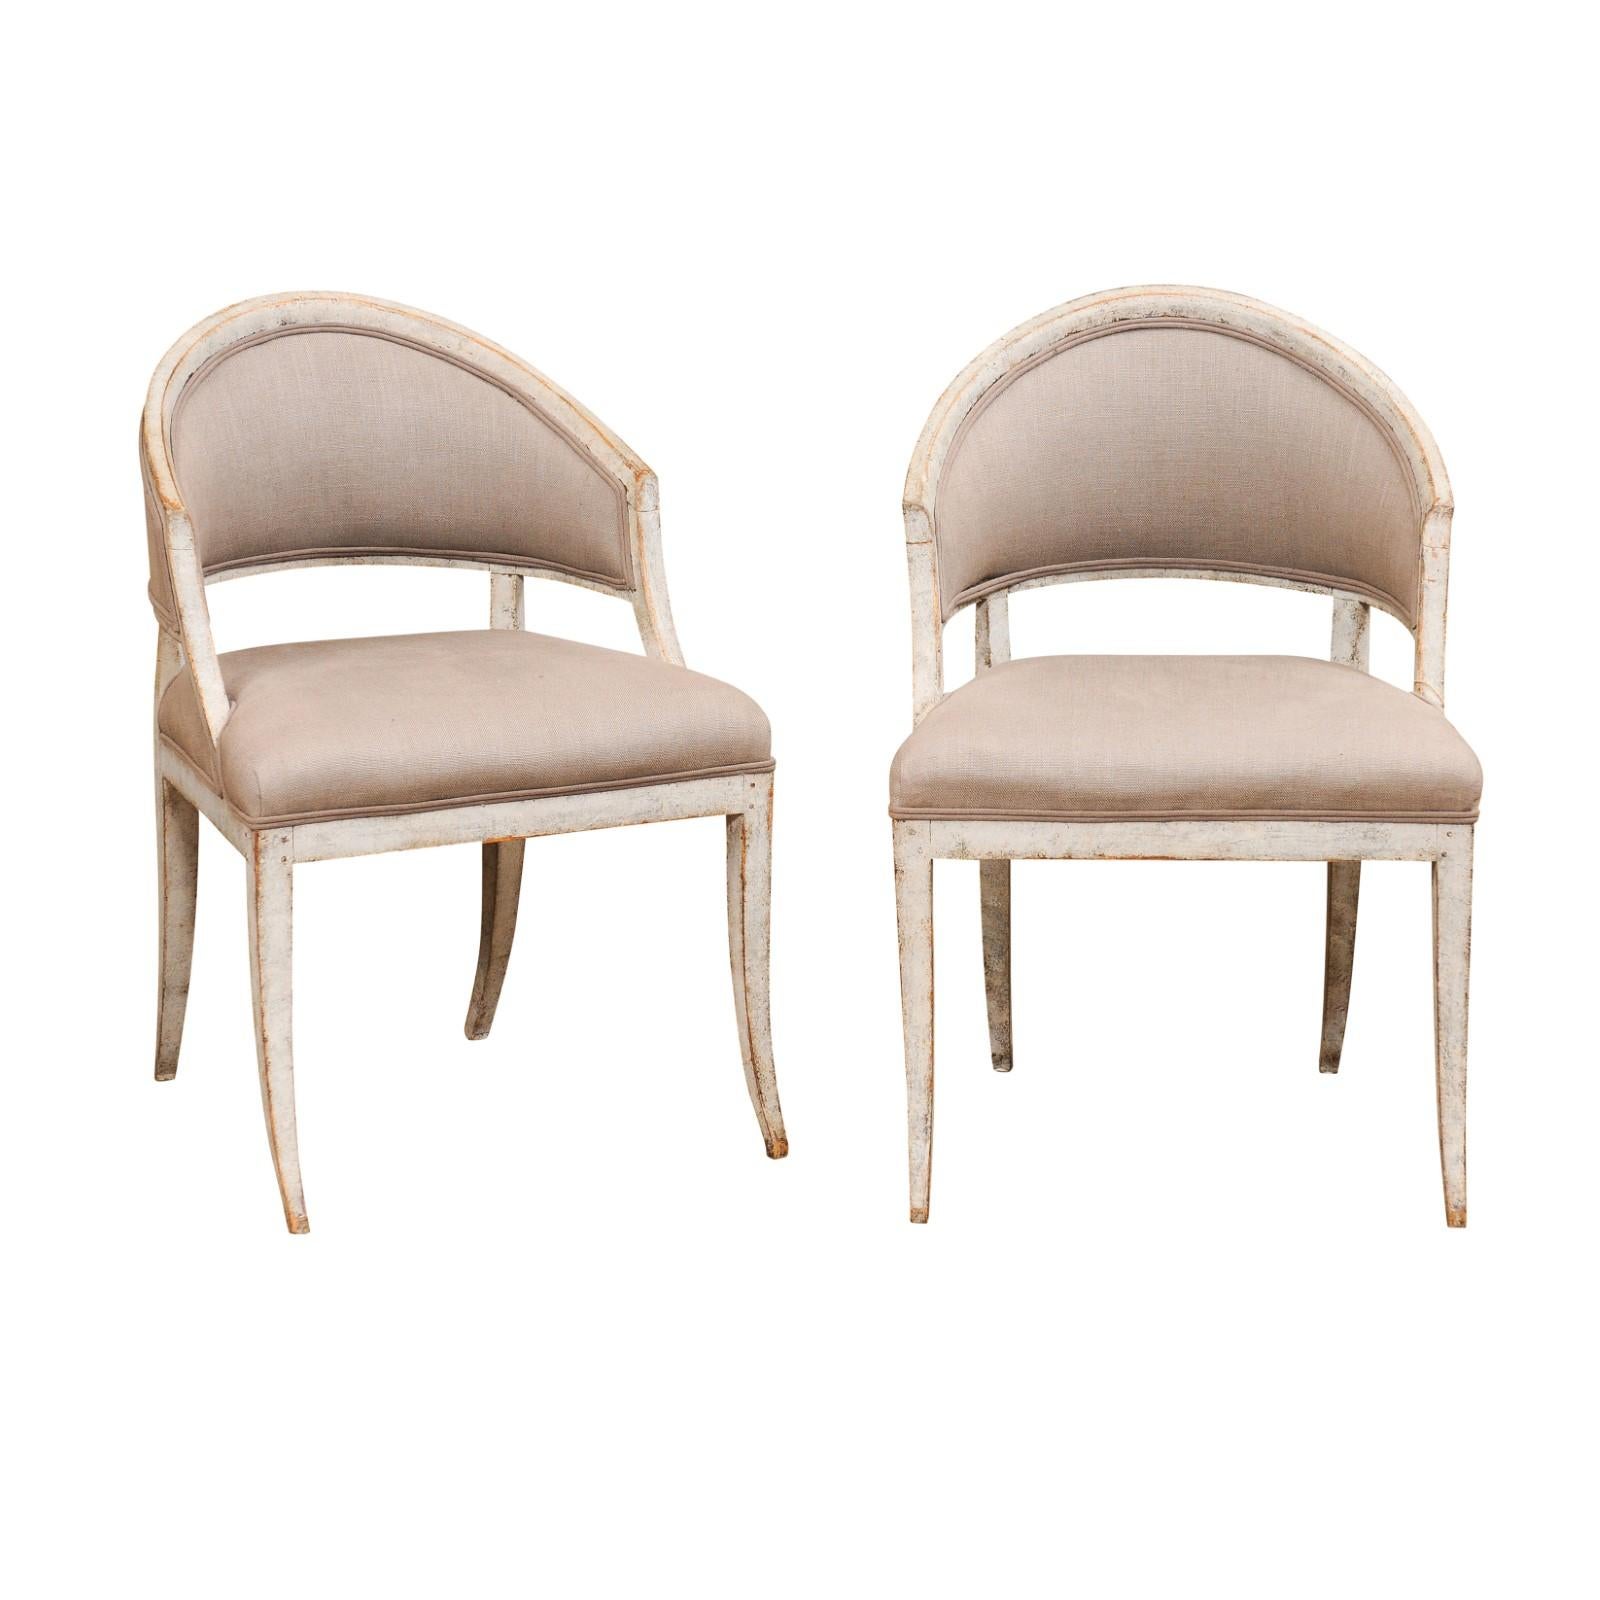 Upholstery Pair of Swedish Gustavian Period 1800s Painted Tub Chairs with Saber Legs